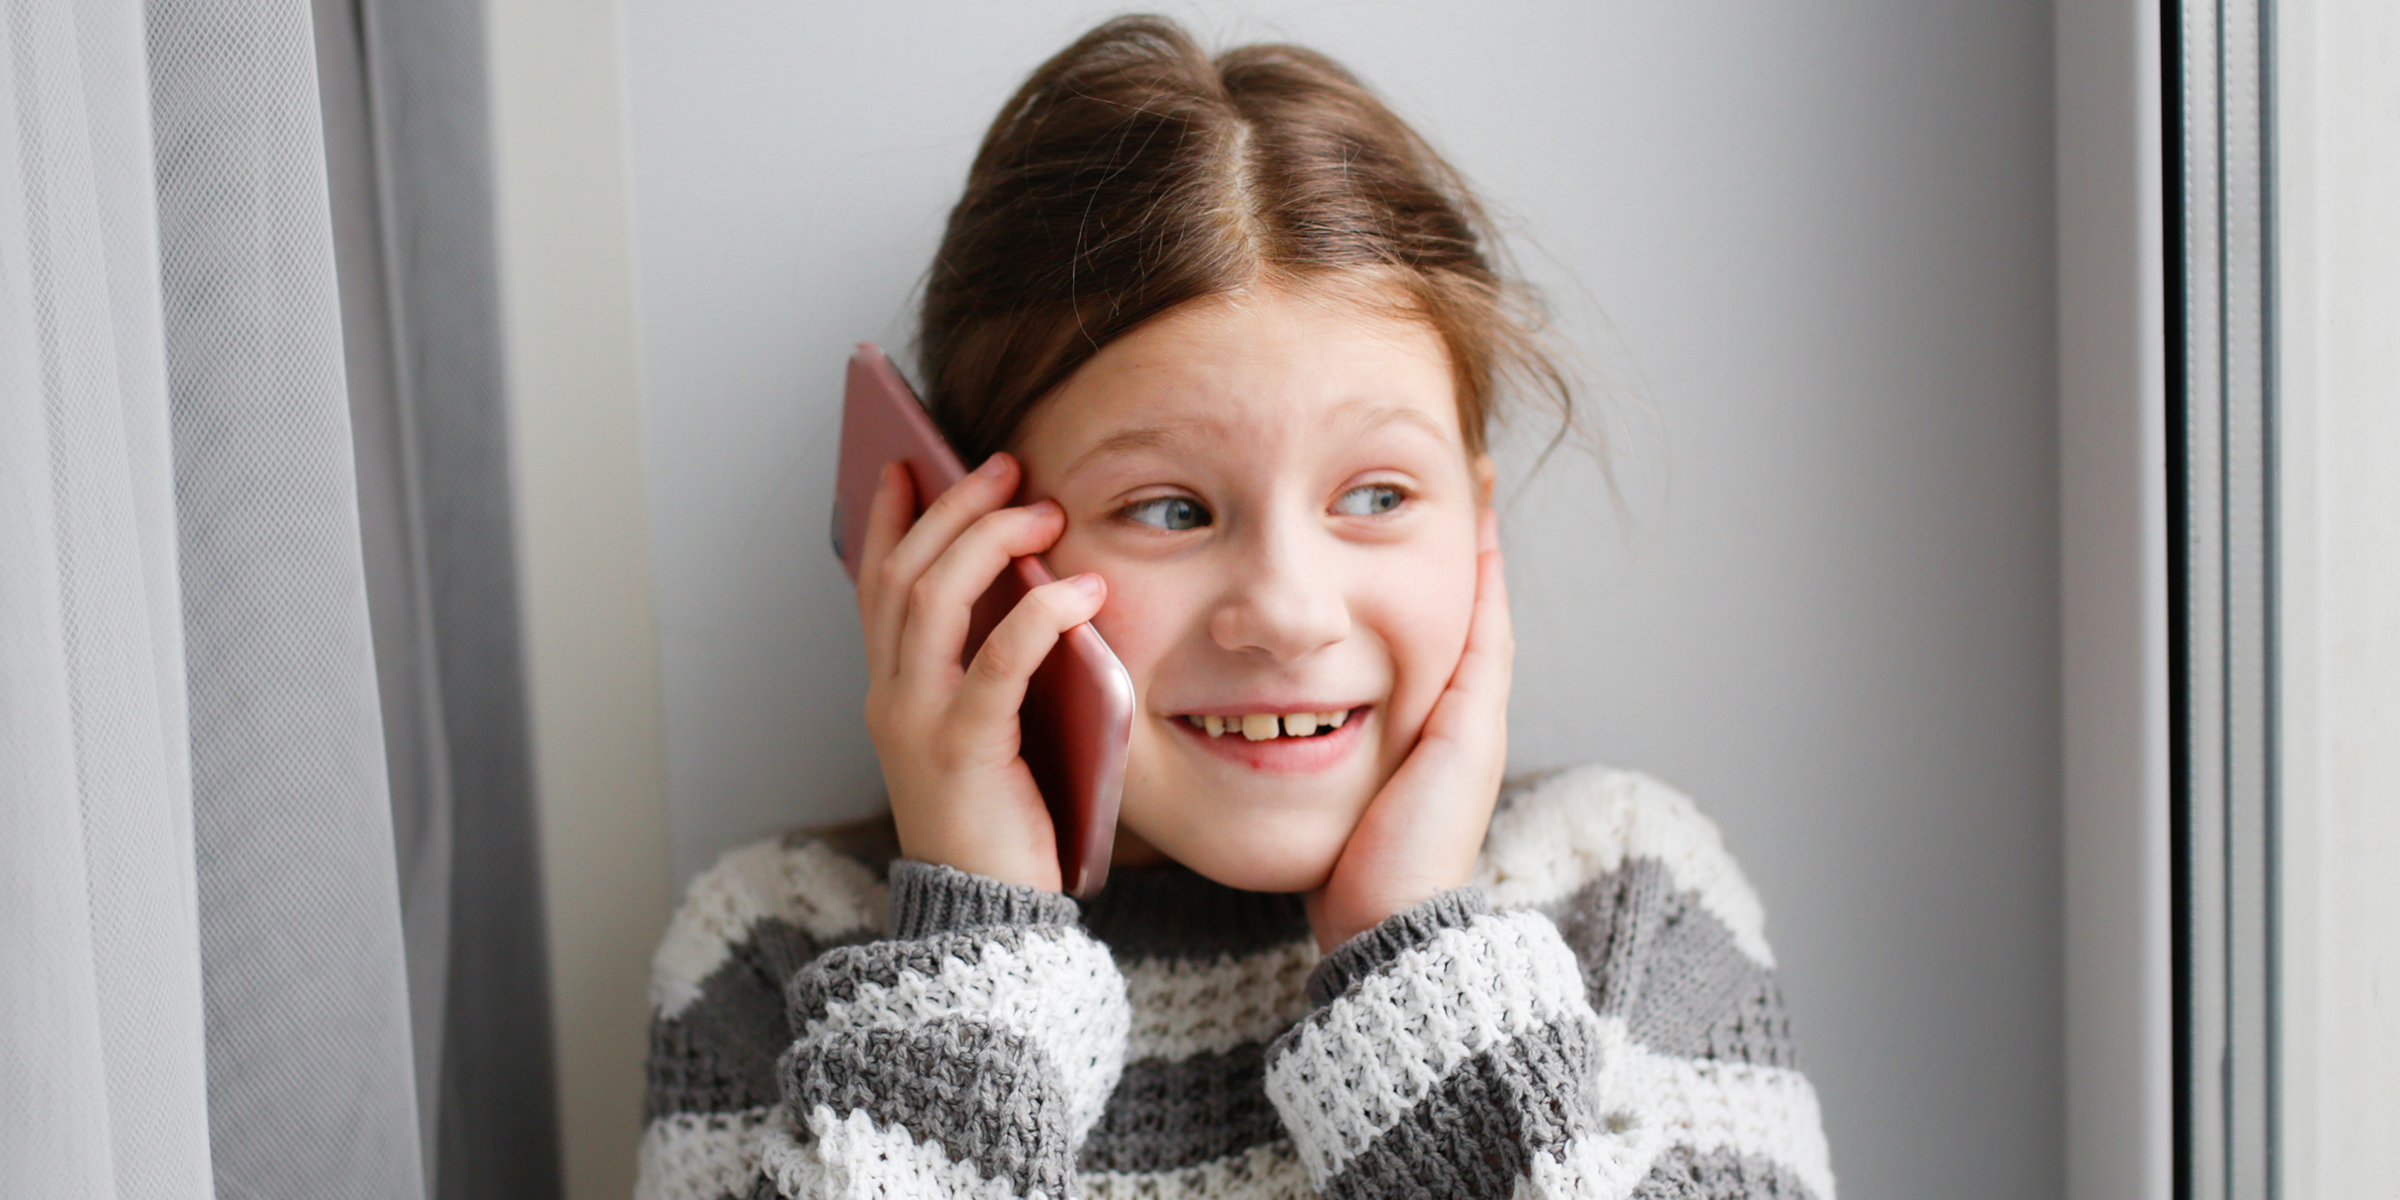 A young girl talking on phone | Source: Shutterstock